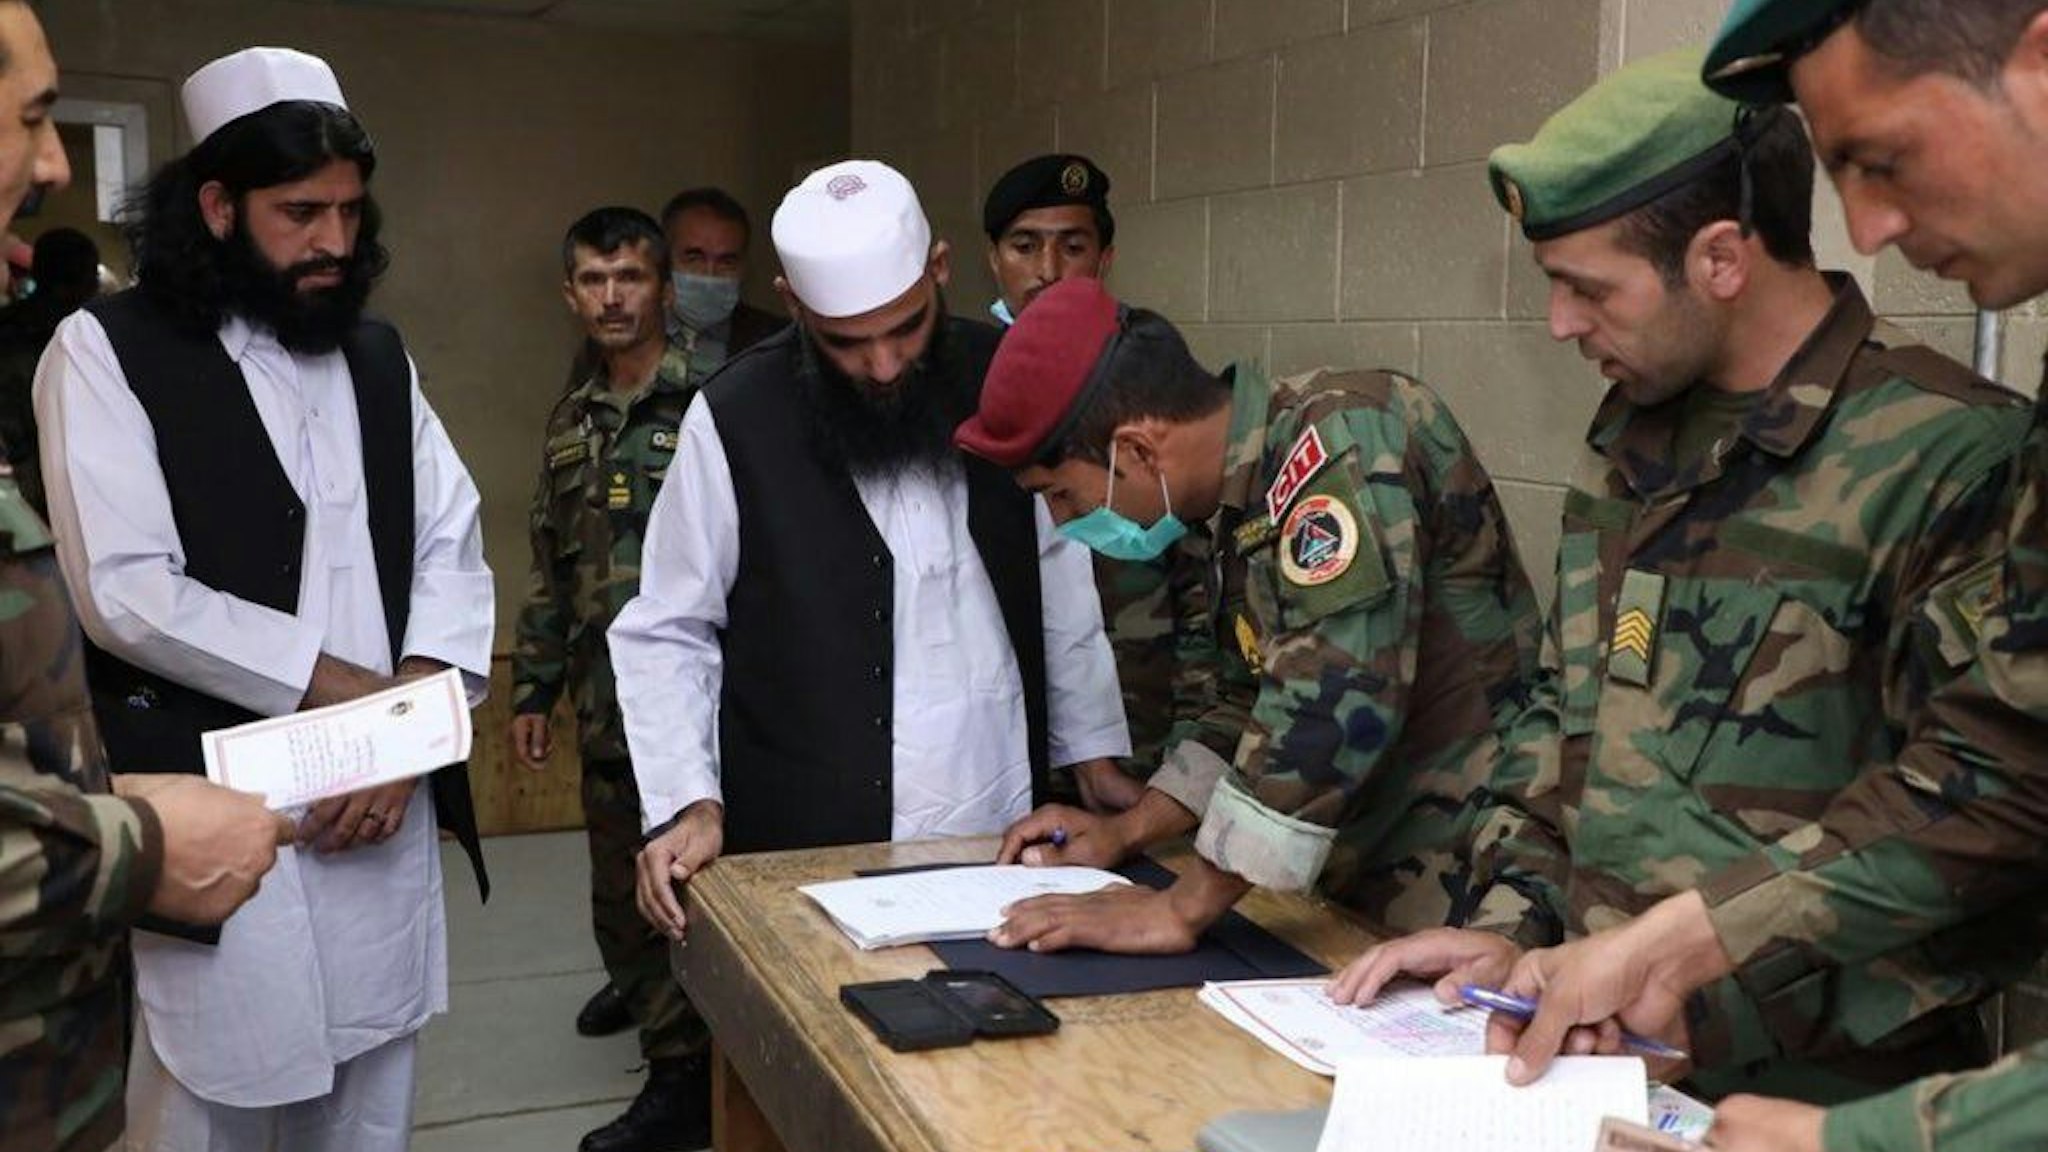 Procedures of Taliban prisoners are being made, in Kabul, Afghanistan on April 9, 2020. The Afghan government released 100 Taliban prisoners following a presidential decree, despite the insurgents' withdrawal from intra-Afghan peace talks.